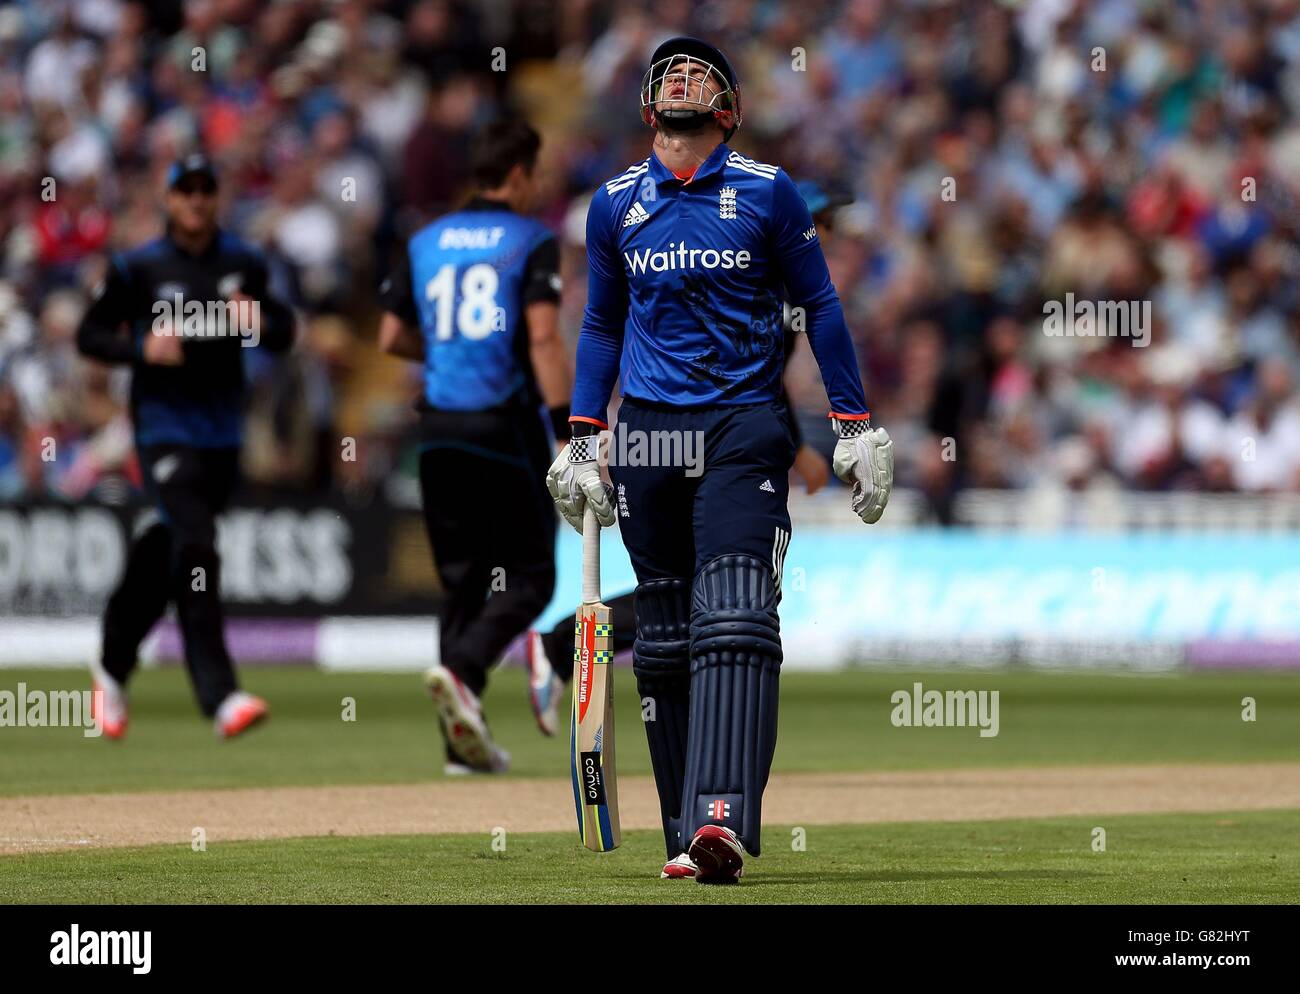 England's Alex Hales skies a catch and is dismissed for 20 during the Royal London One-Day Cup at Edgbaston, Birmingham. Stock Photo